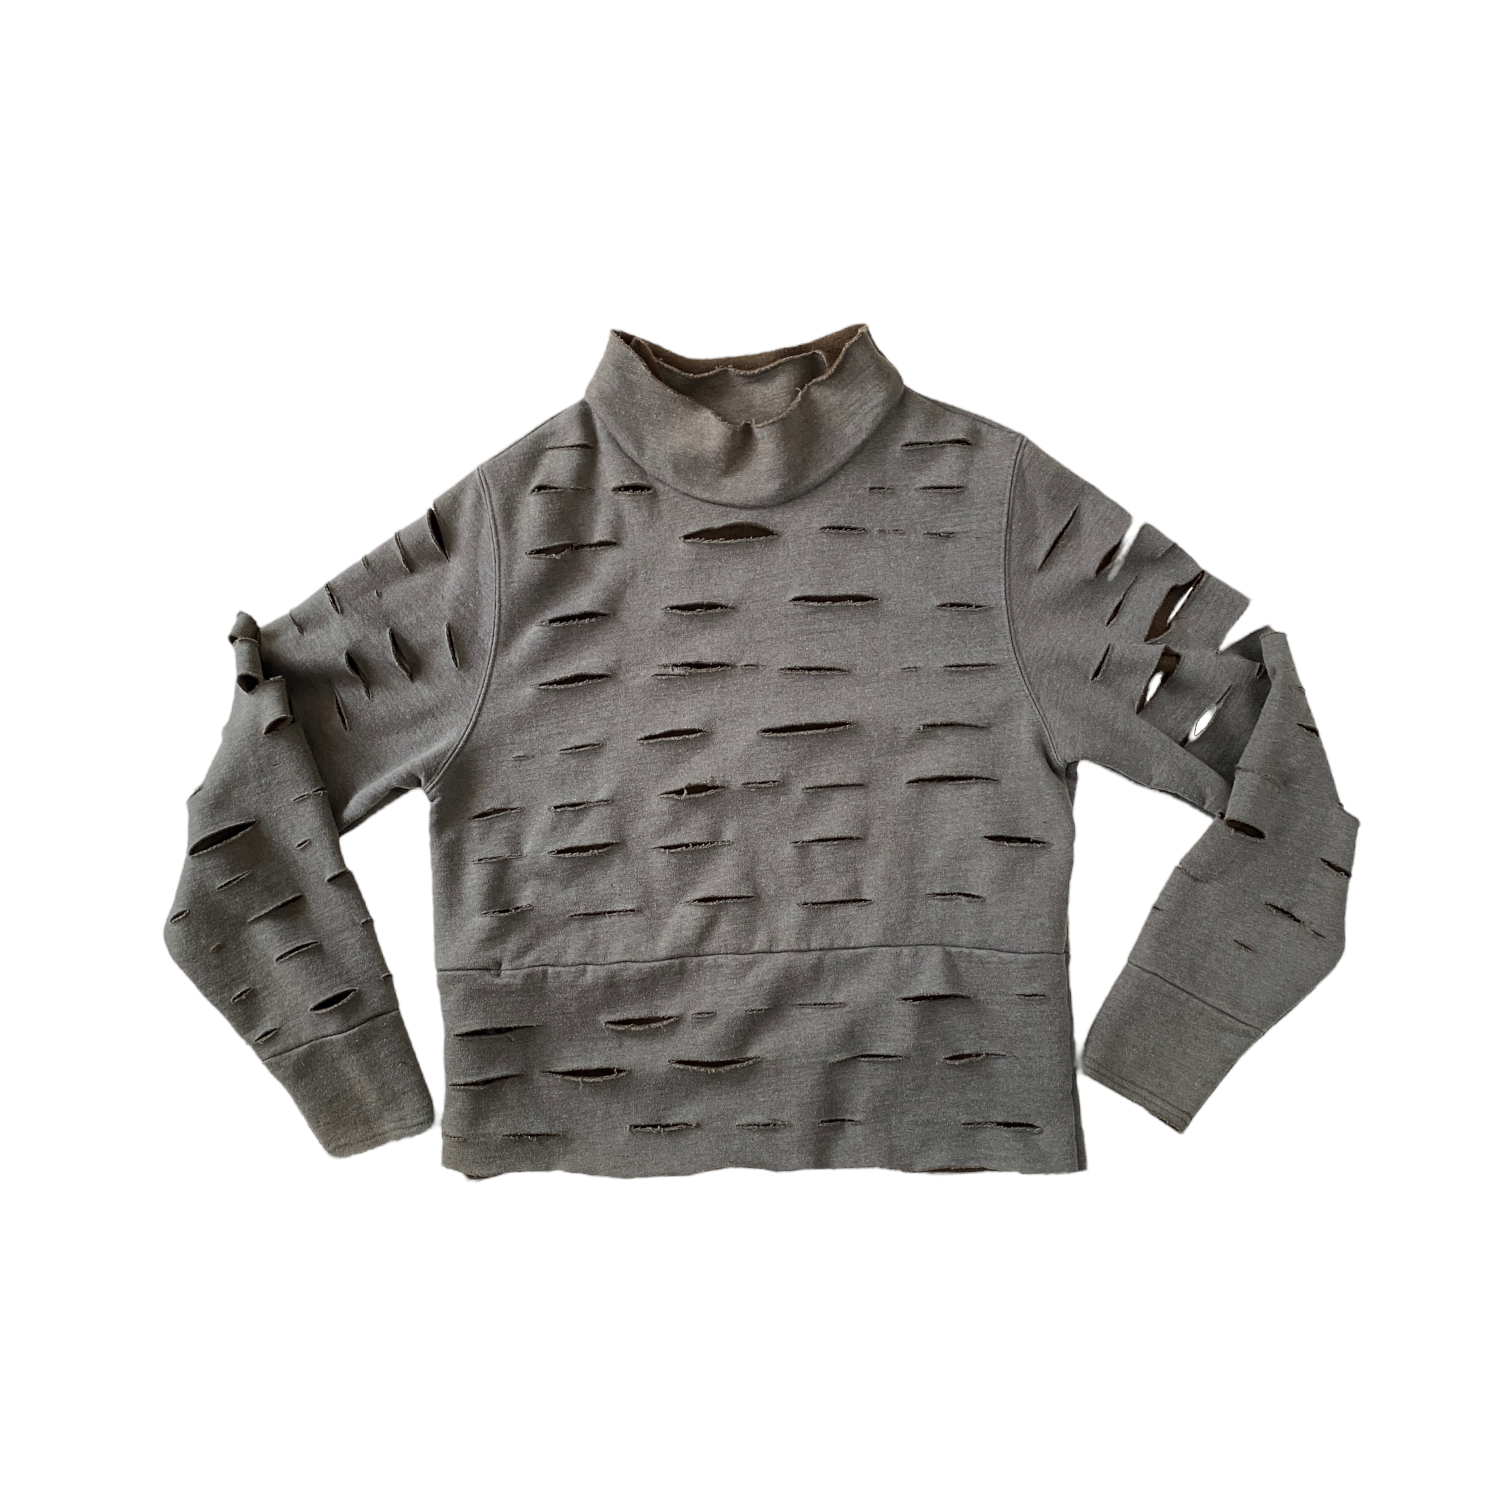 olive green mockneck sweatshirt with small slits cut in lines across the body and arms